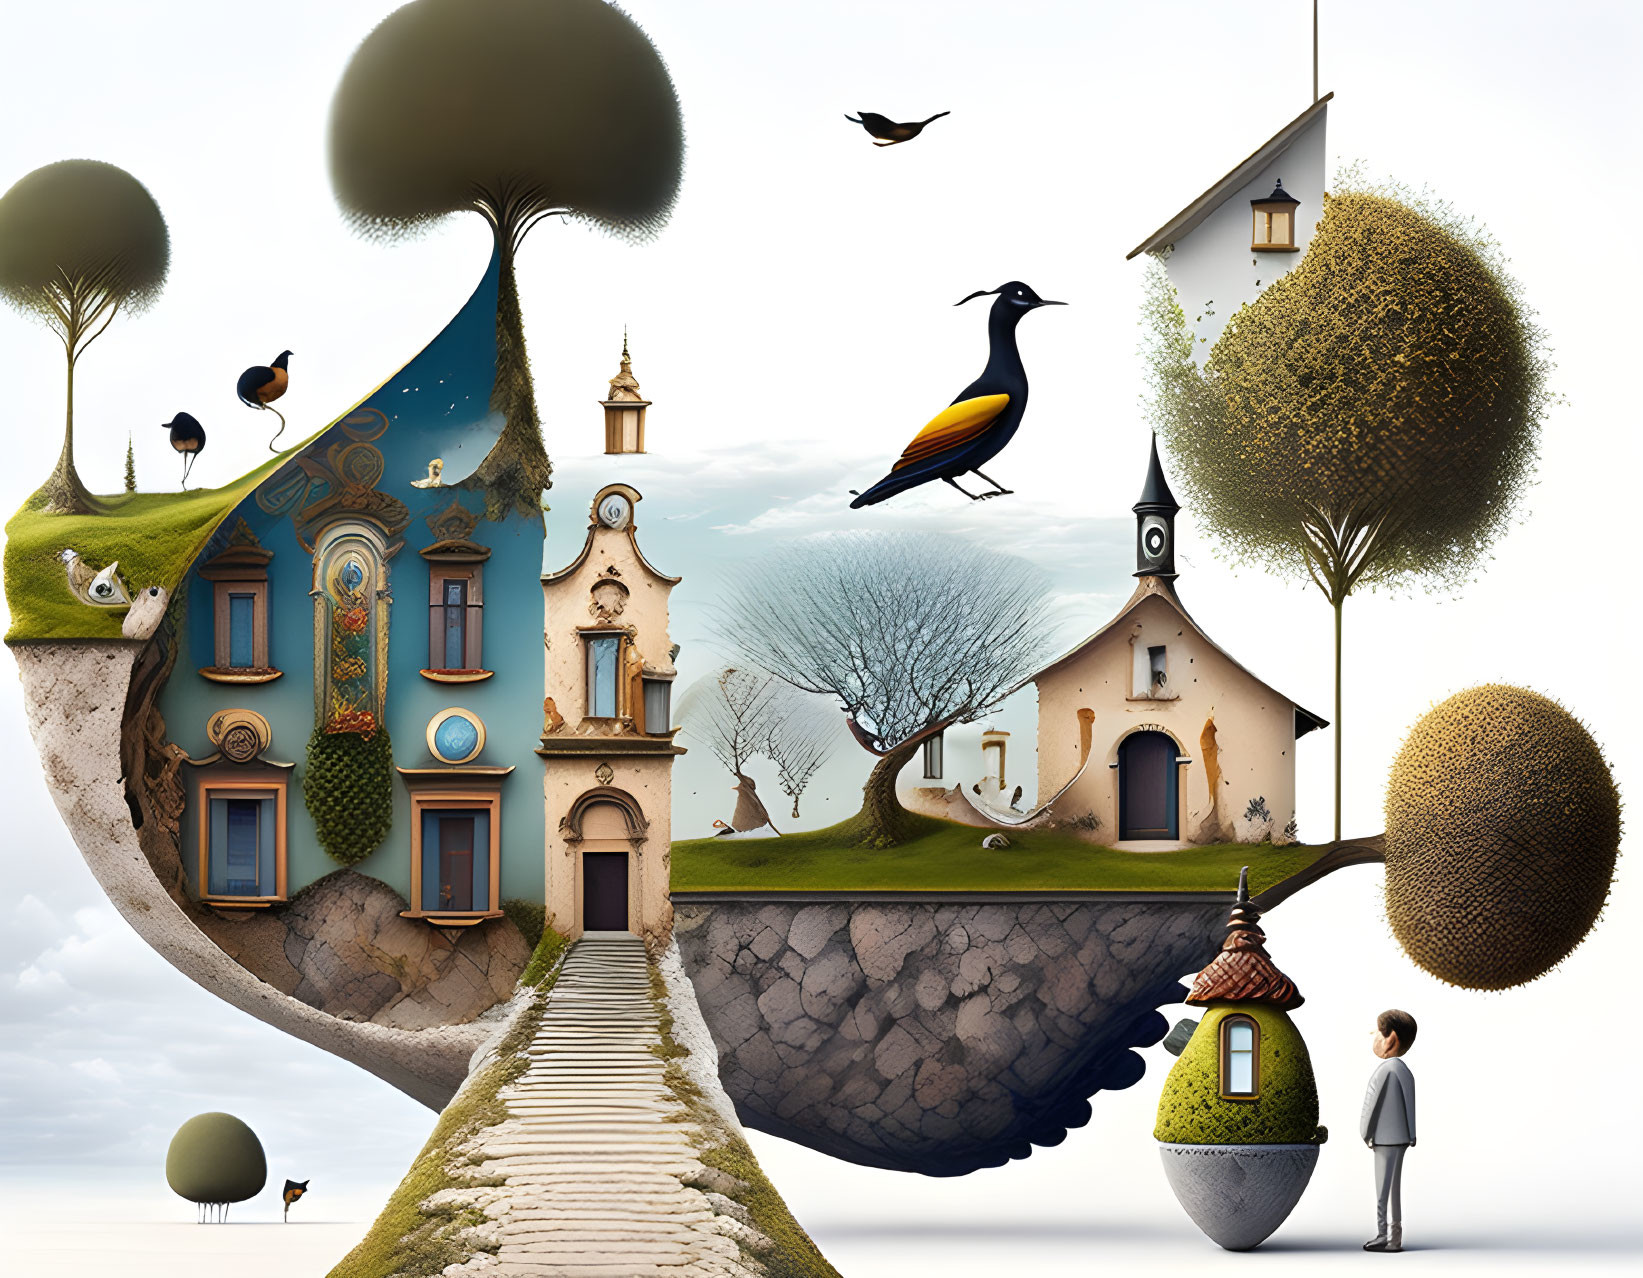 Surreal floating islands with houses, trees, birds, child, and lantern-carrying figure